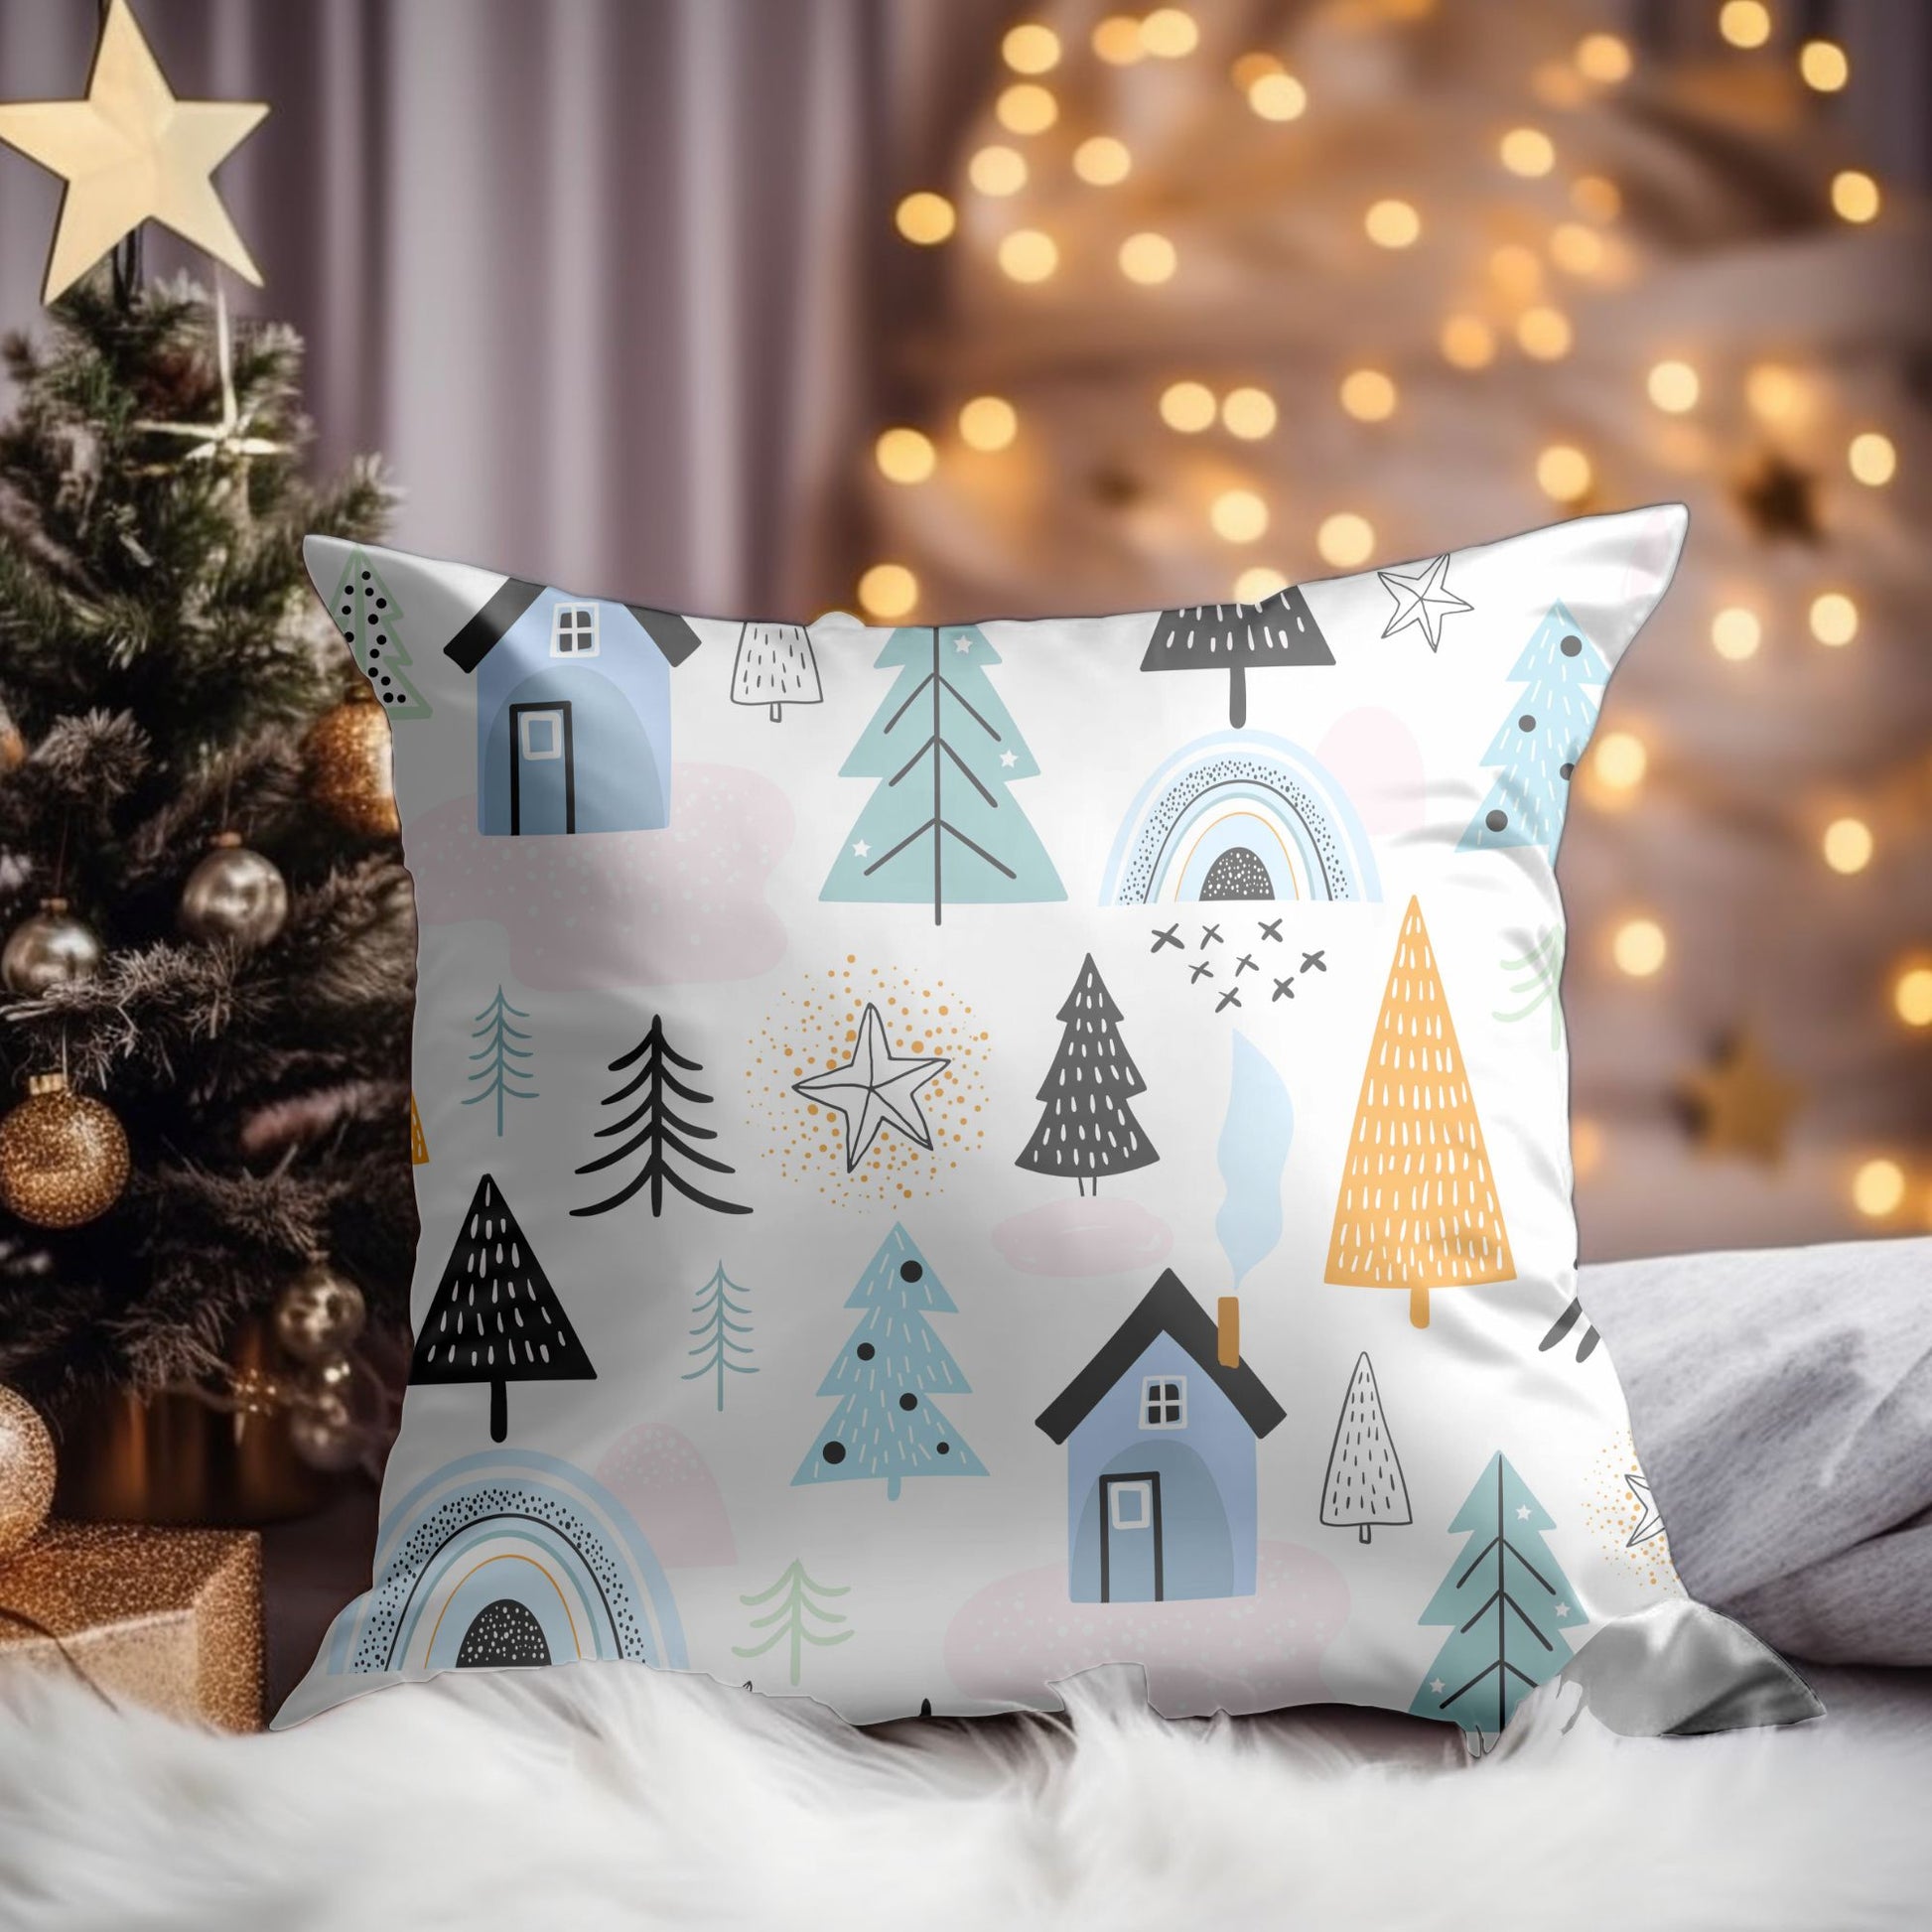 Rustic Christmas Decor Pillow with Cabin Design